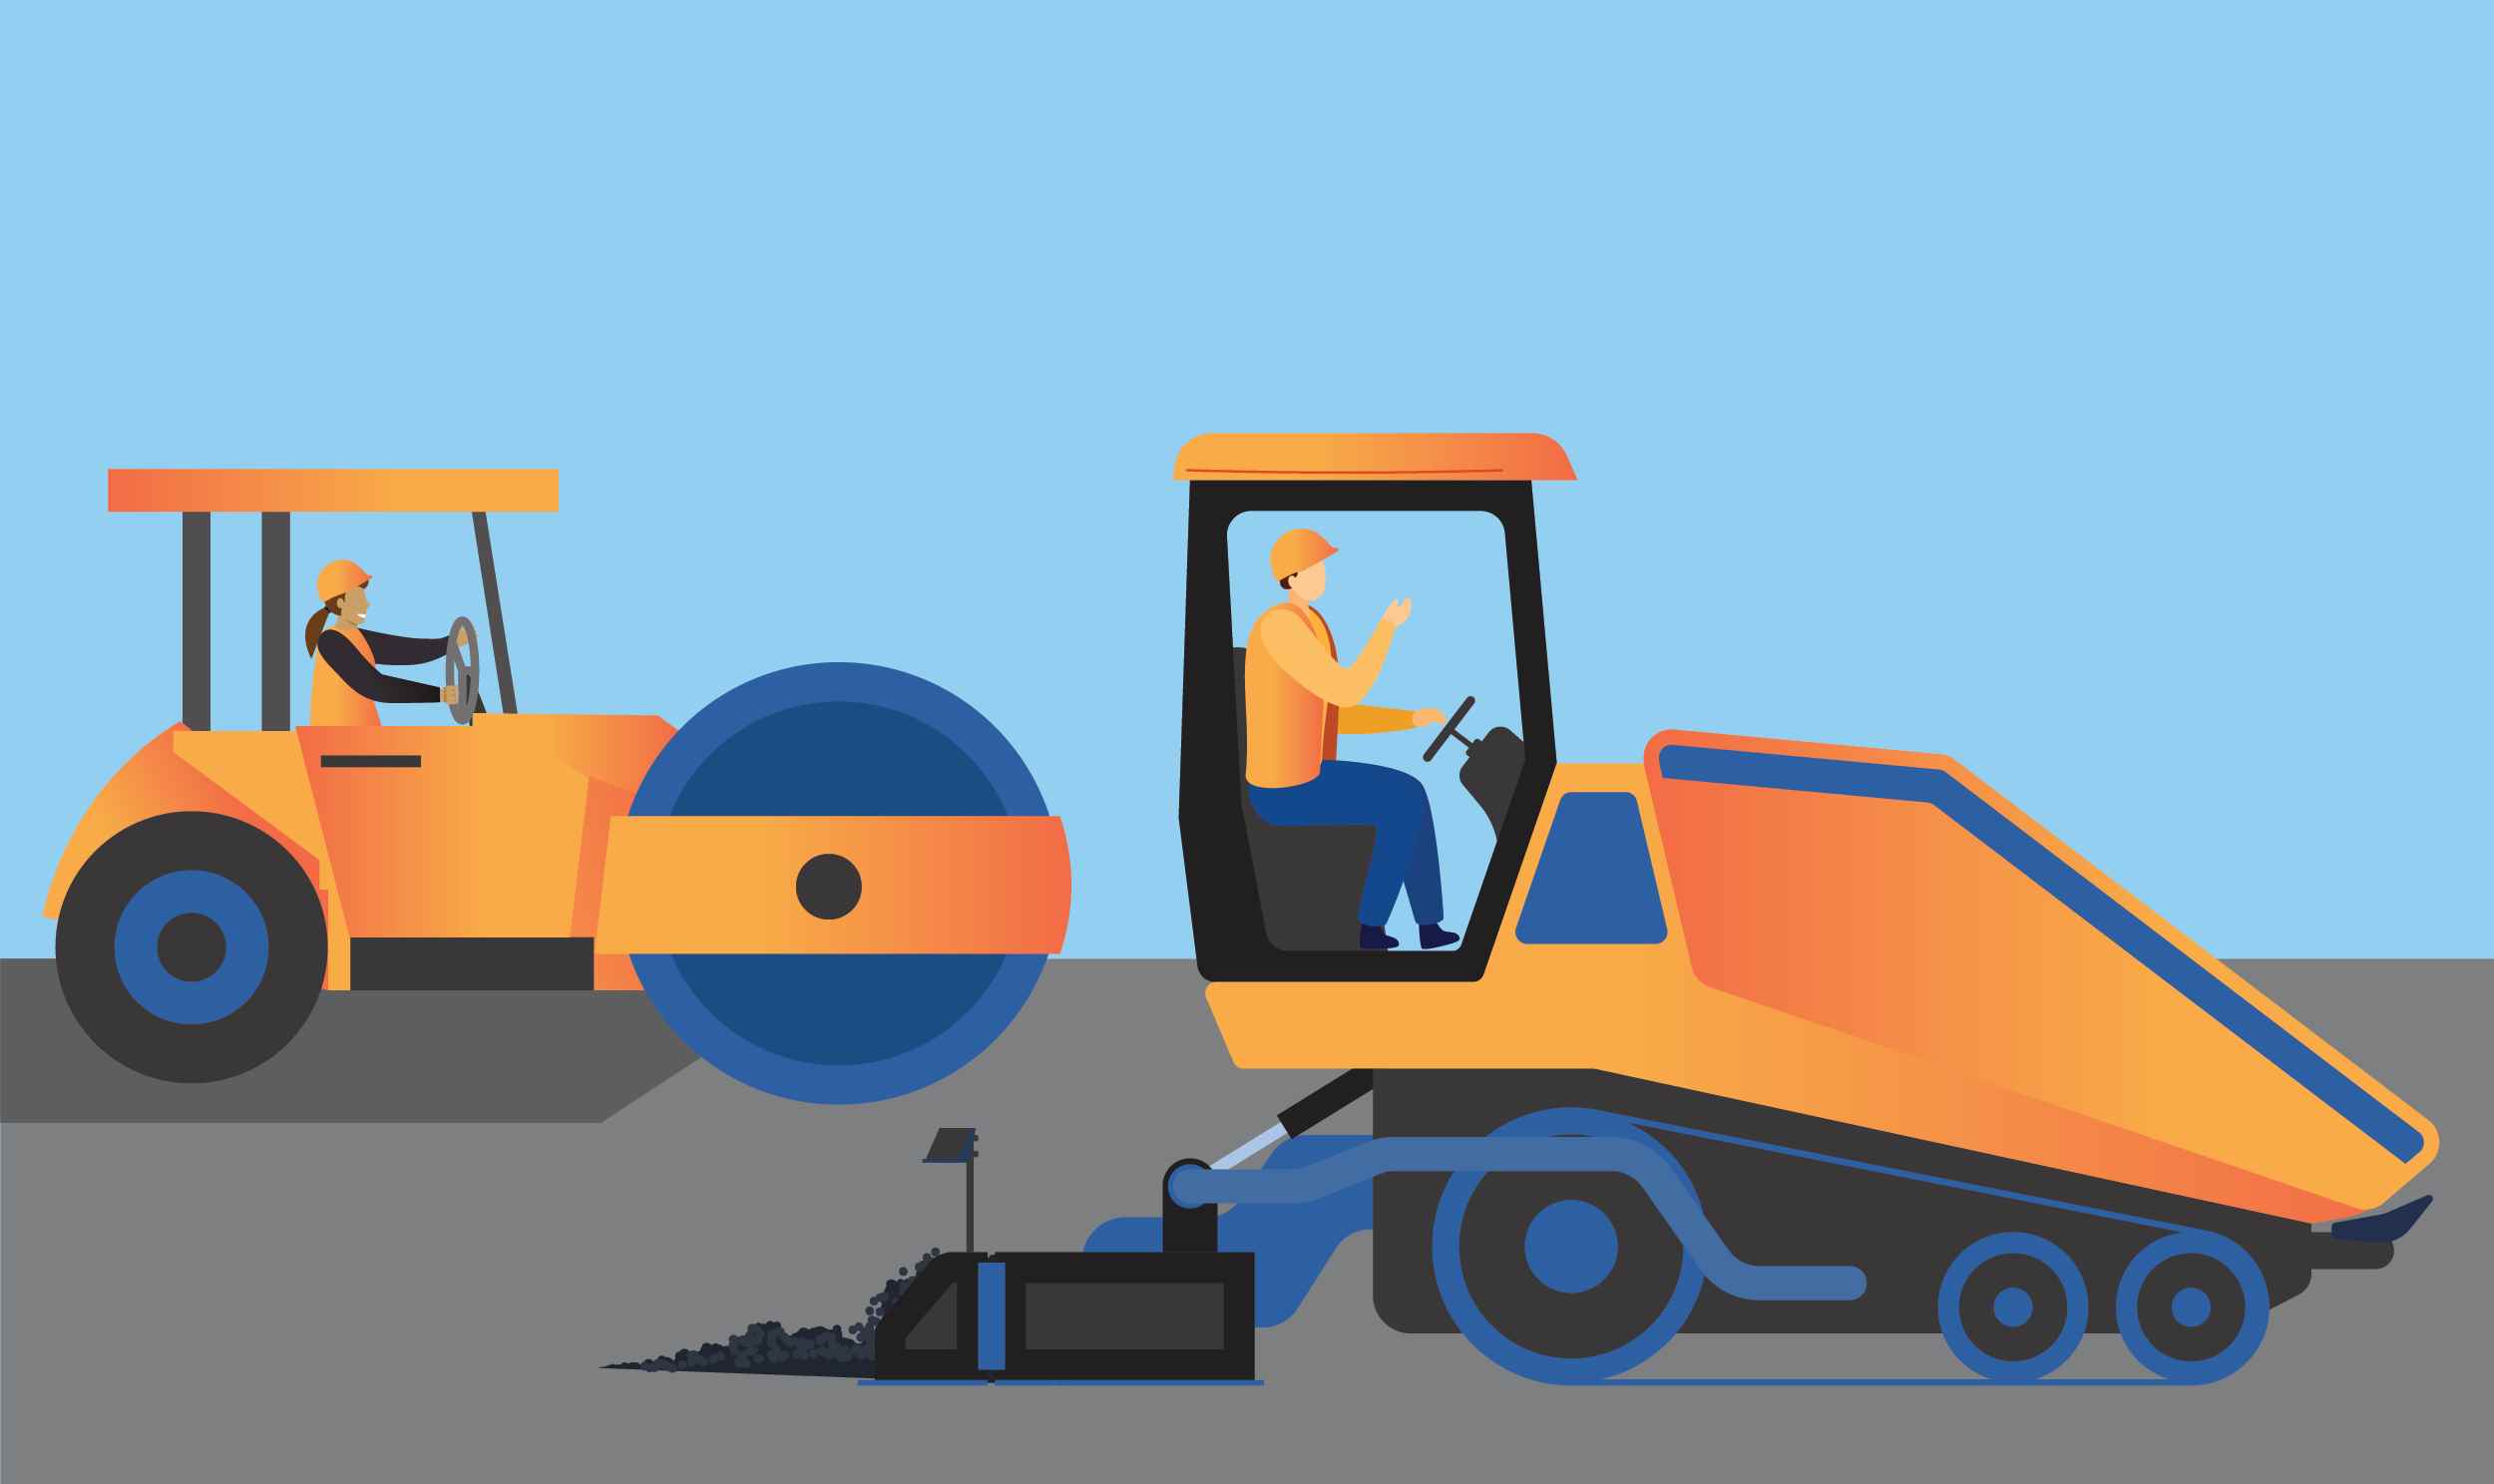 A graphic of a paver machine spreading asphalt on the road for asphalt resurfacing. A roller machine is seen in the background compacting the asphalt.